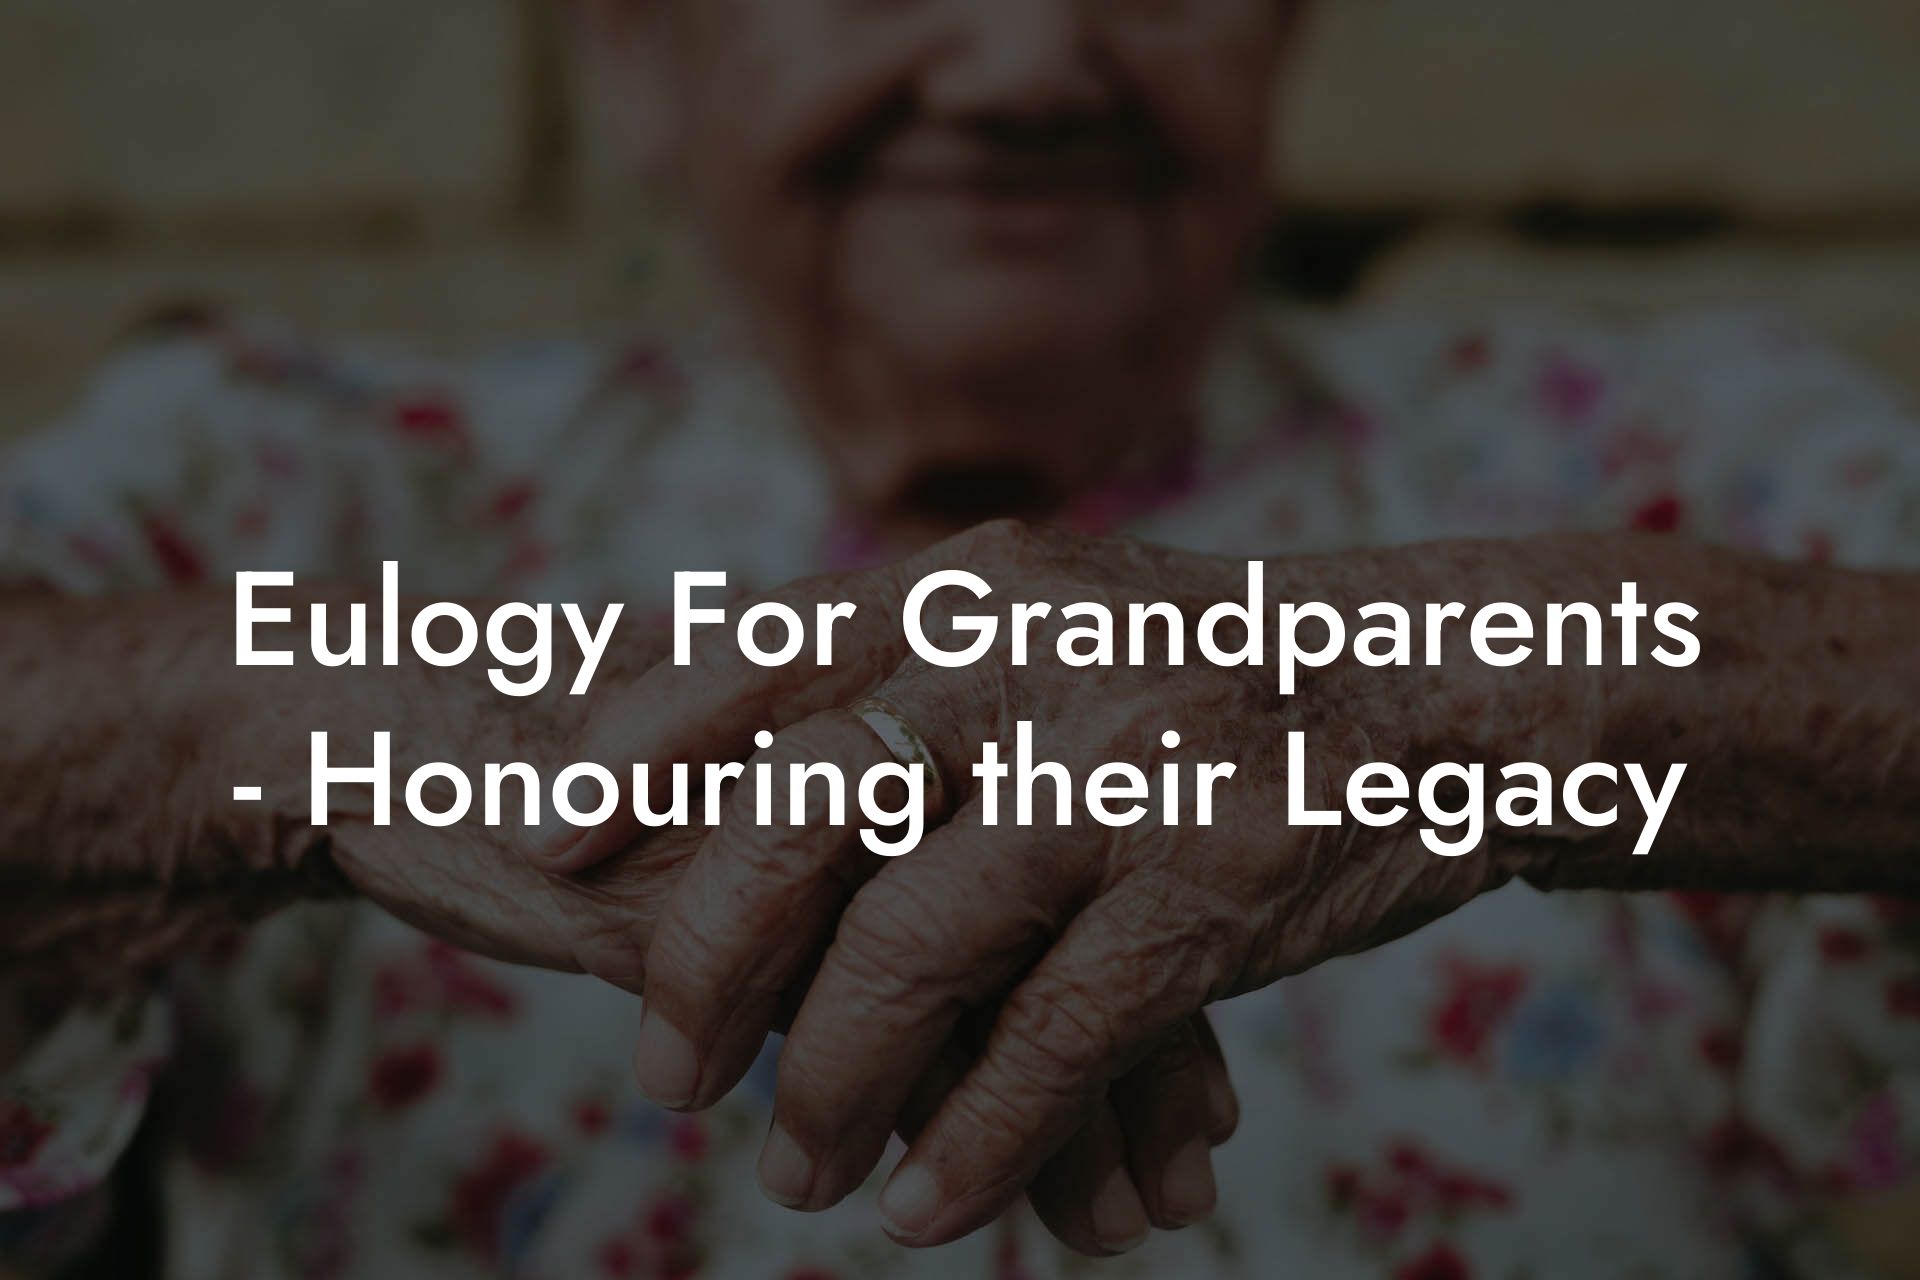 Eulogy For Grandparents - Honouring their Legacy